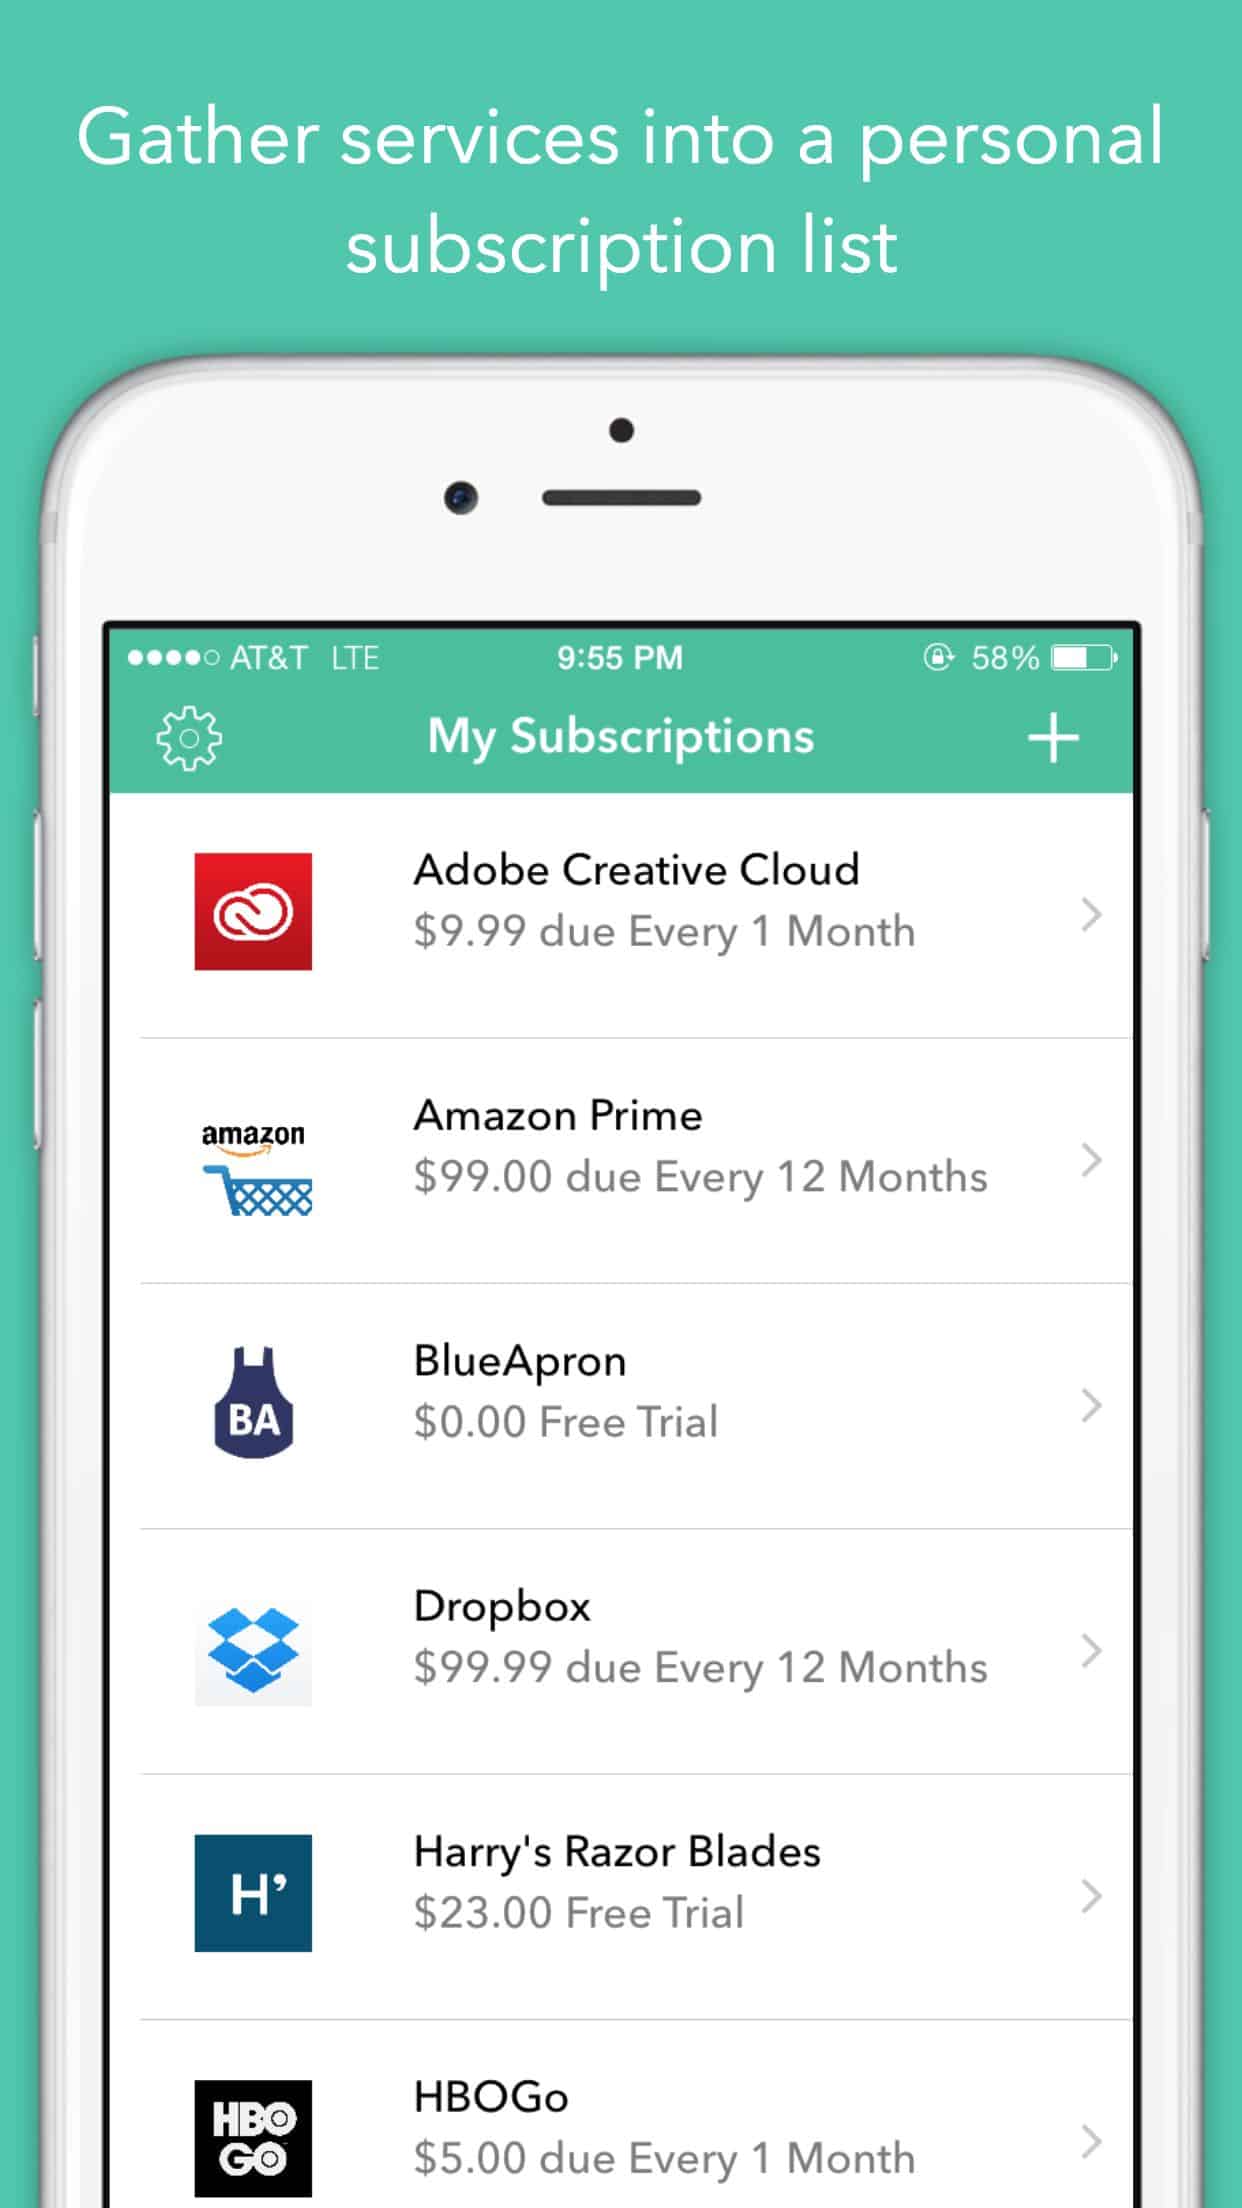 Mobile app UI of SubscriptMe presents your online subscription data in a pleasant layout